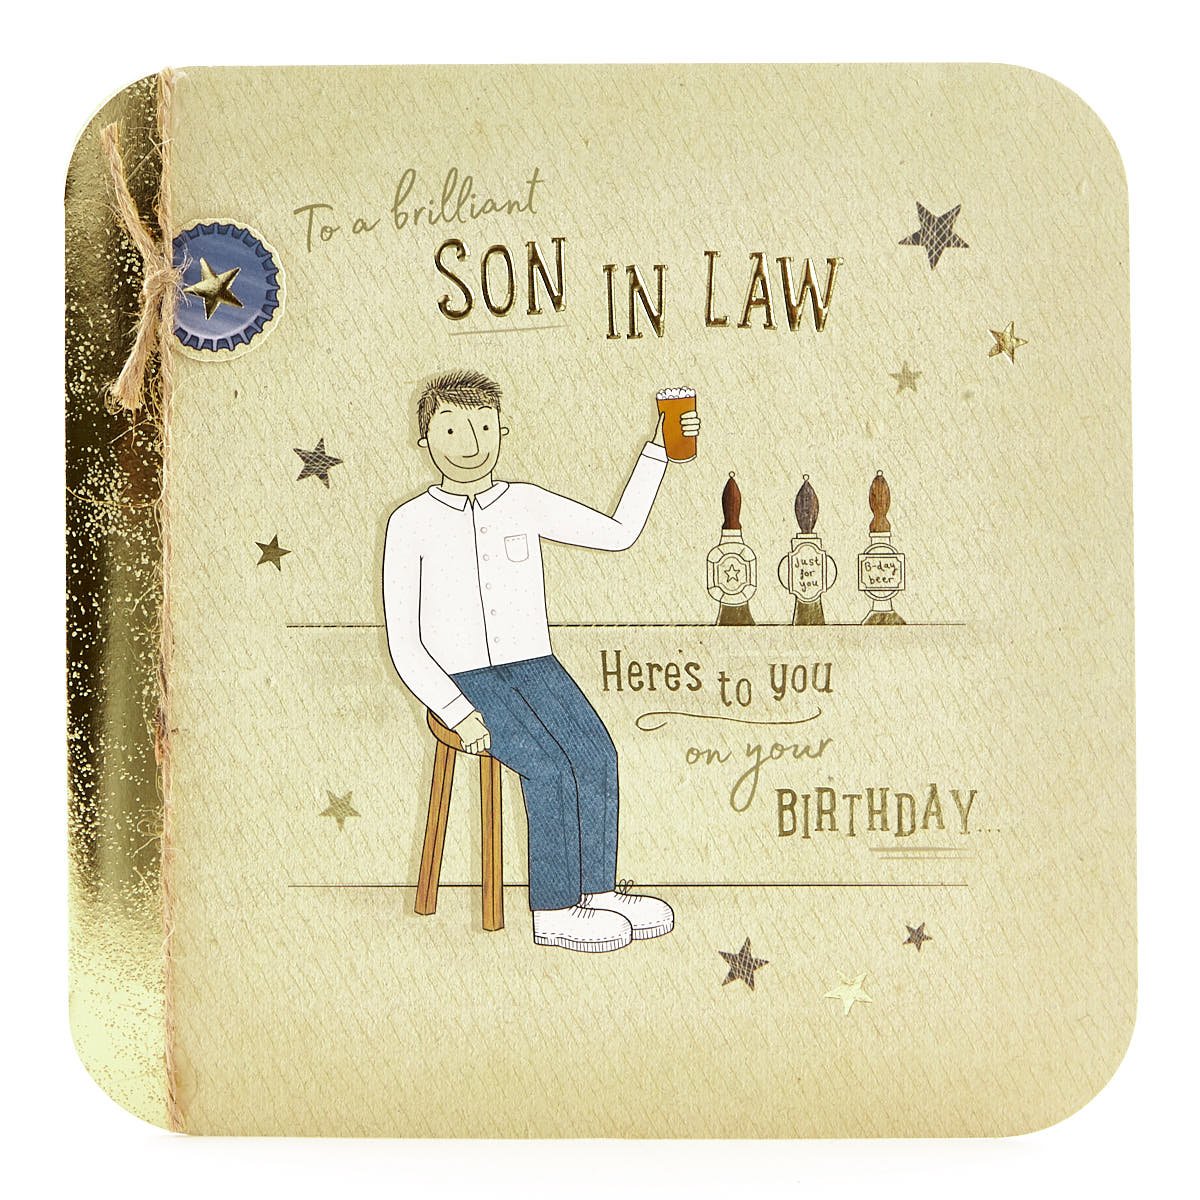 Exquisite Collection Birthday Card - Brilliant Son In Law